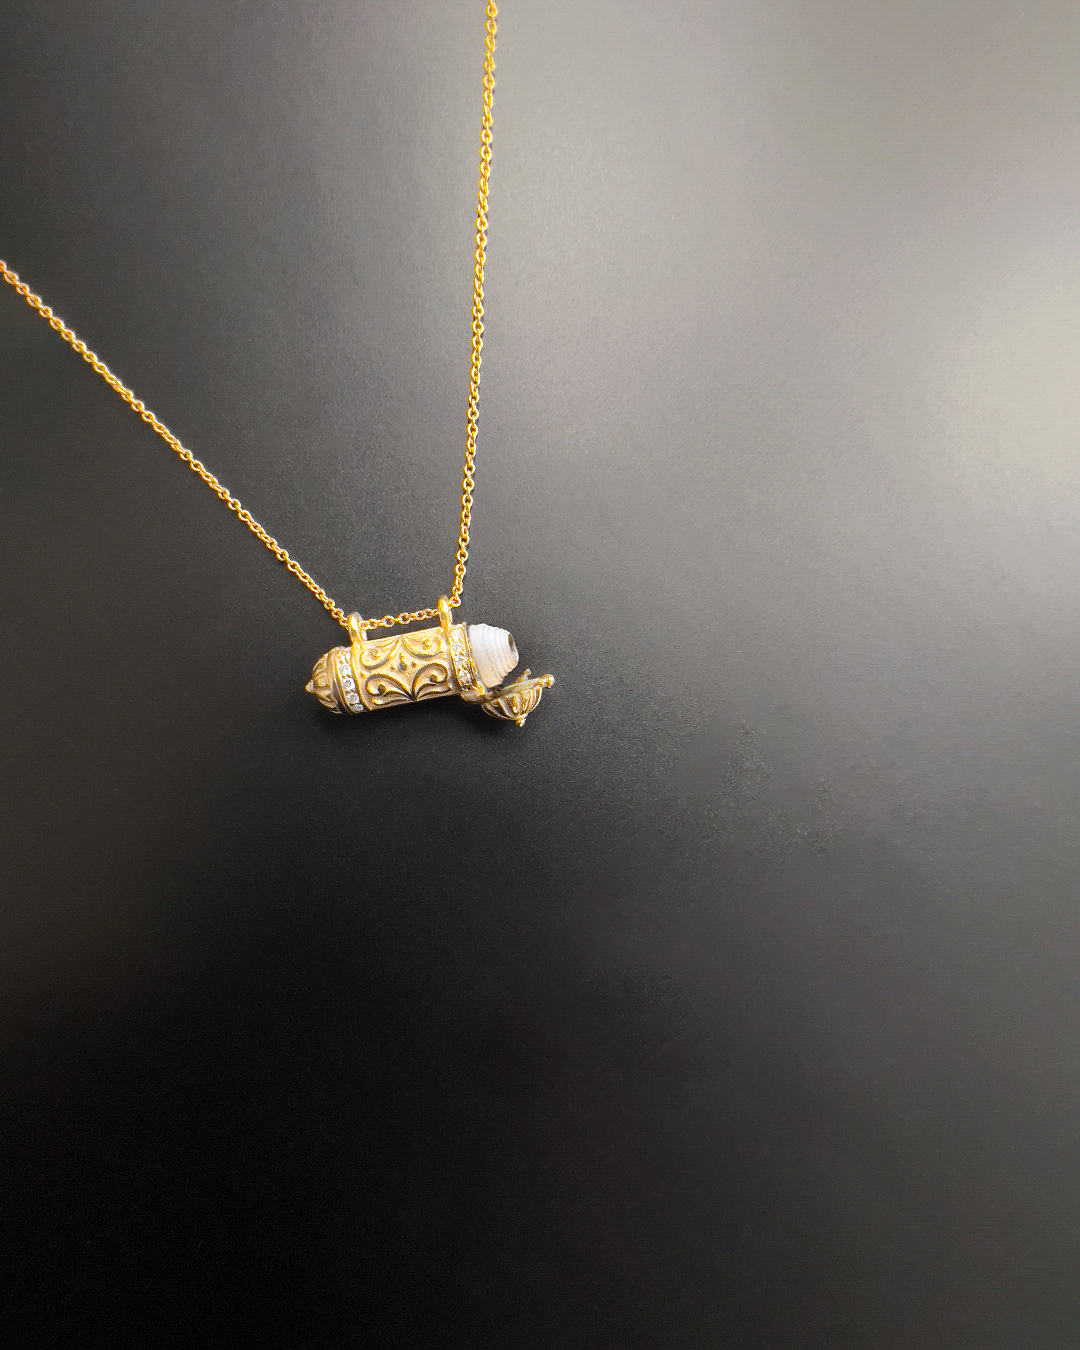 14K Gold and Diamond Amulet Necklace 14K Yellow Gold / 14 - 16 Adjustable (Choker Length) +$10